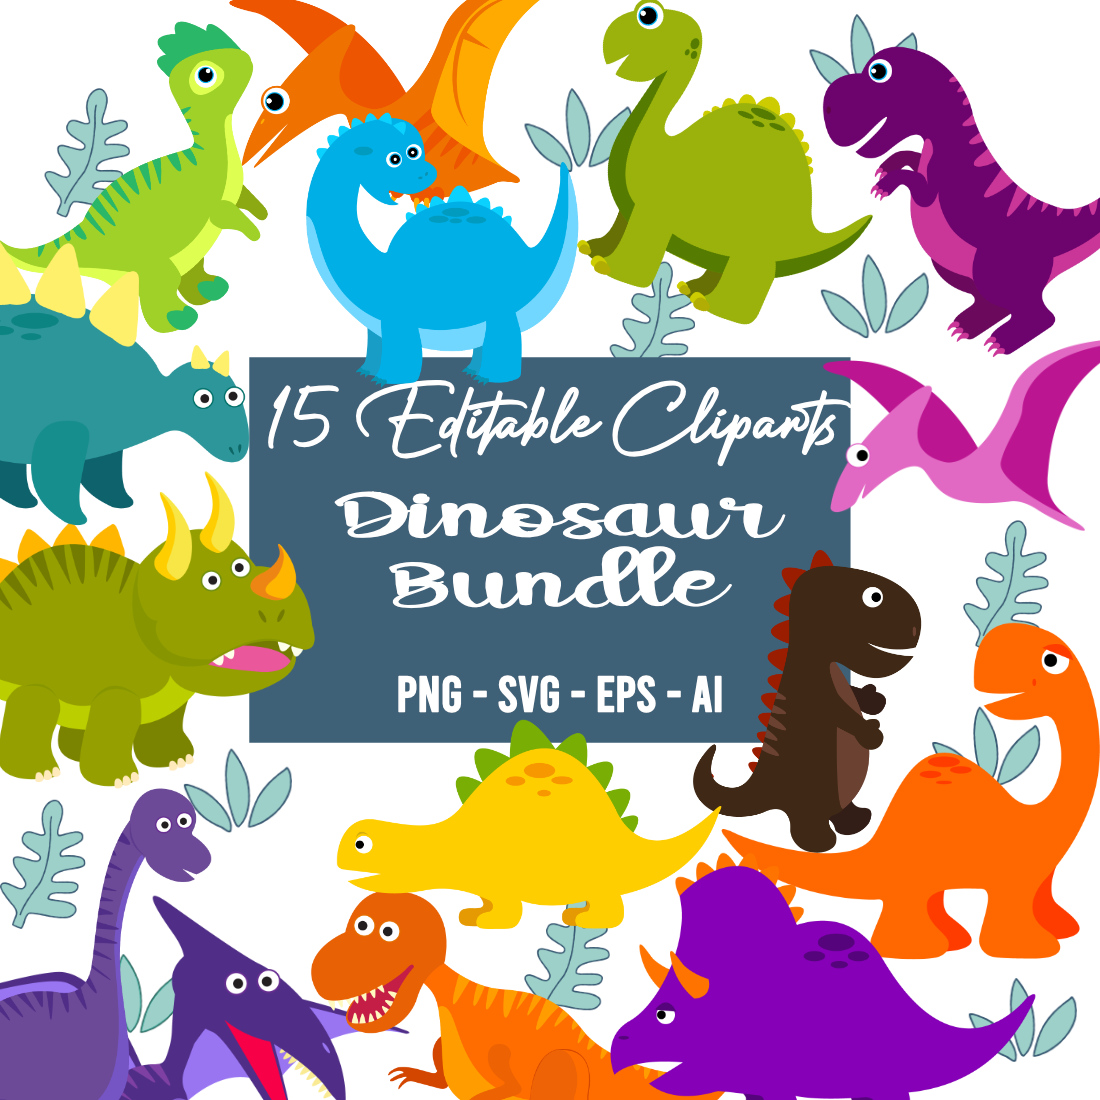 Dinosaurs Clipart Editable Set cover image.